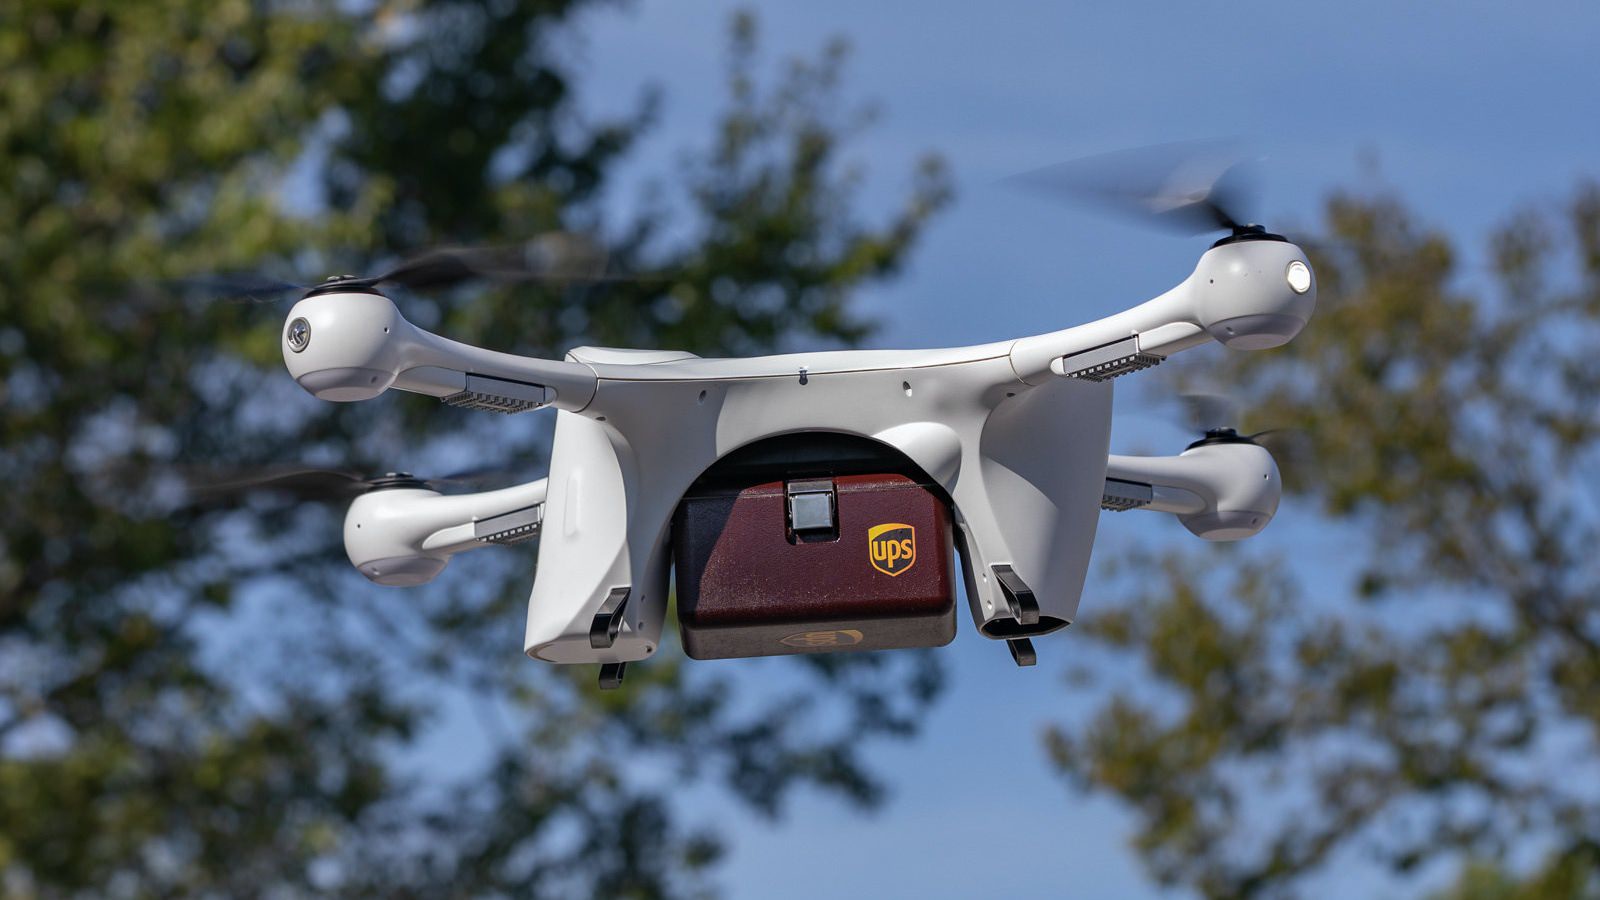 UPS and CVS partner to deliver prescriptions by drone